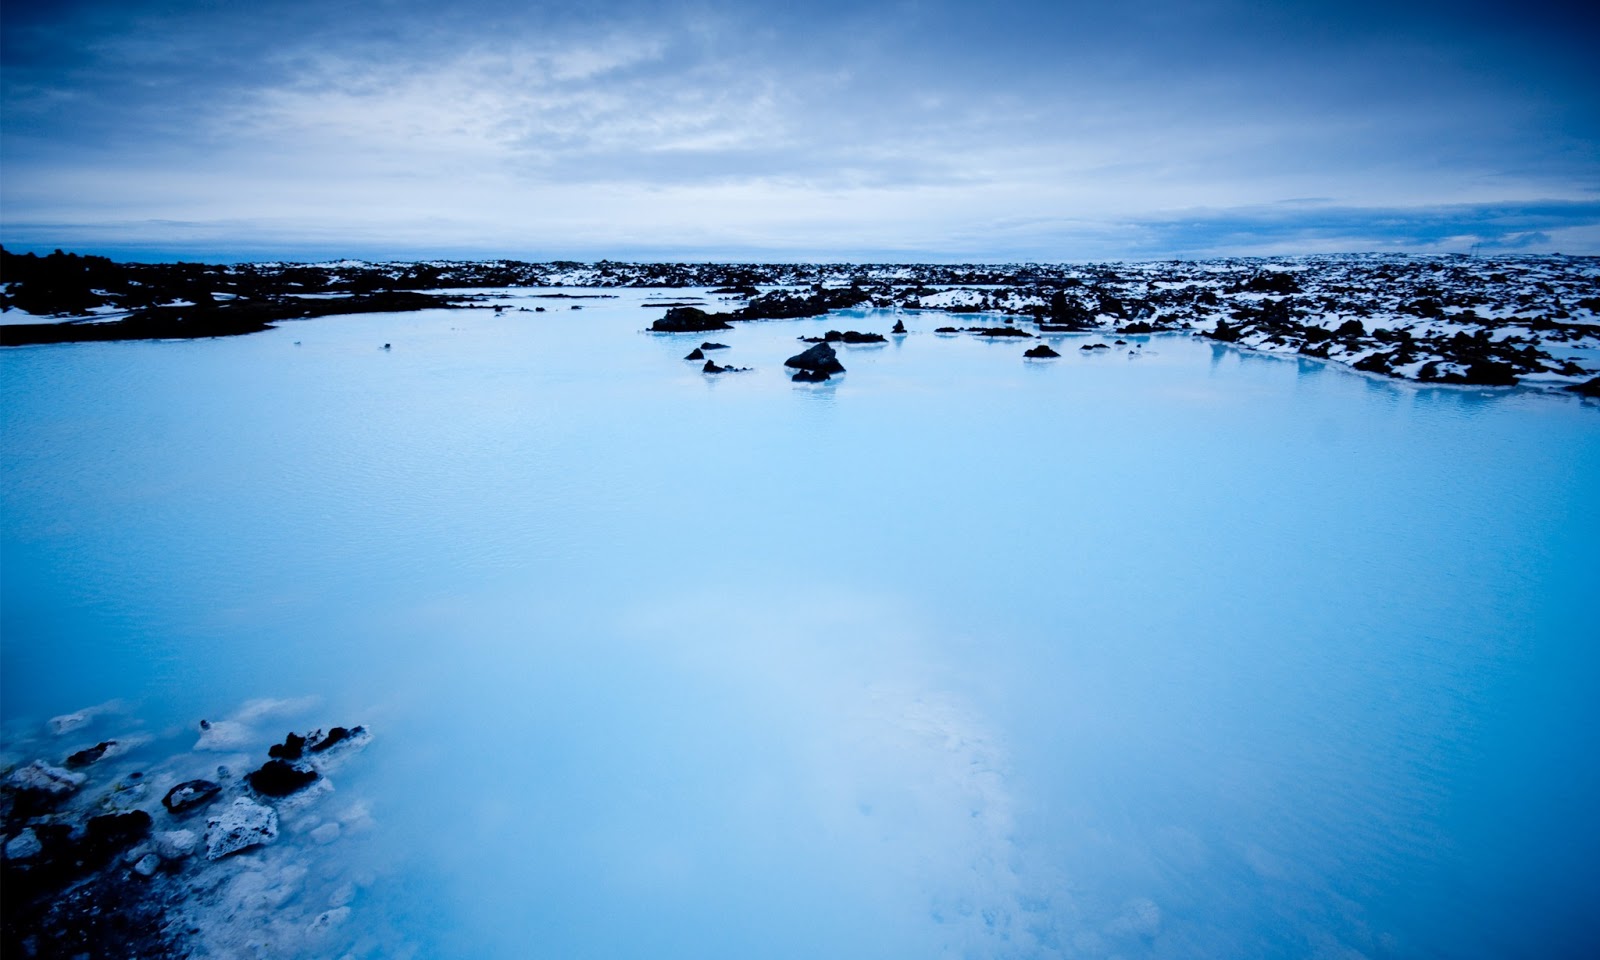  Iceland  HD  wallpapers  HD  Wallpapers  High Definition 